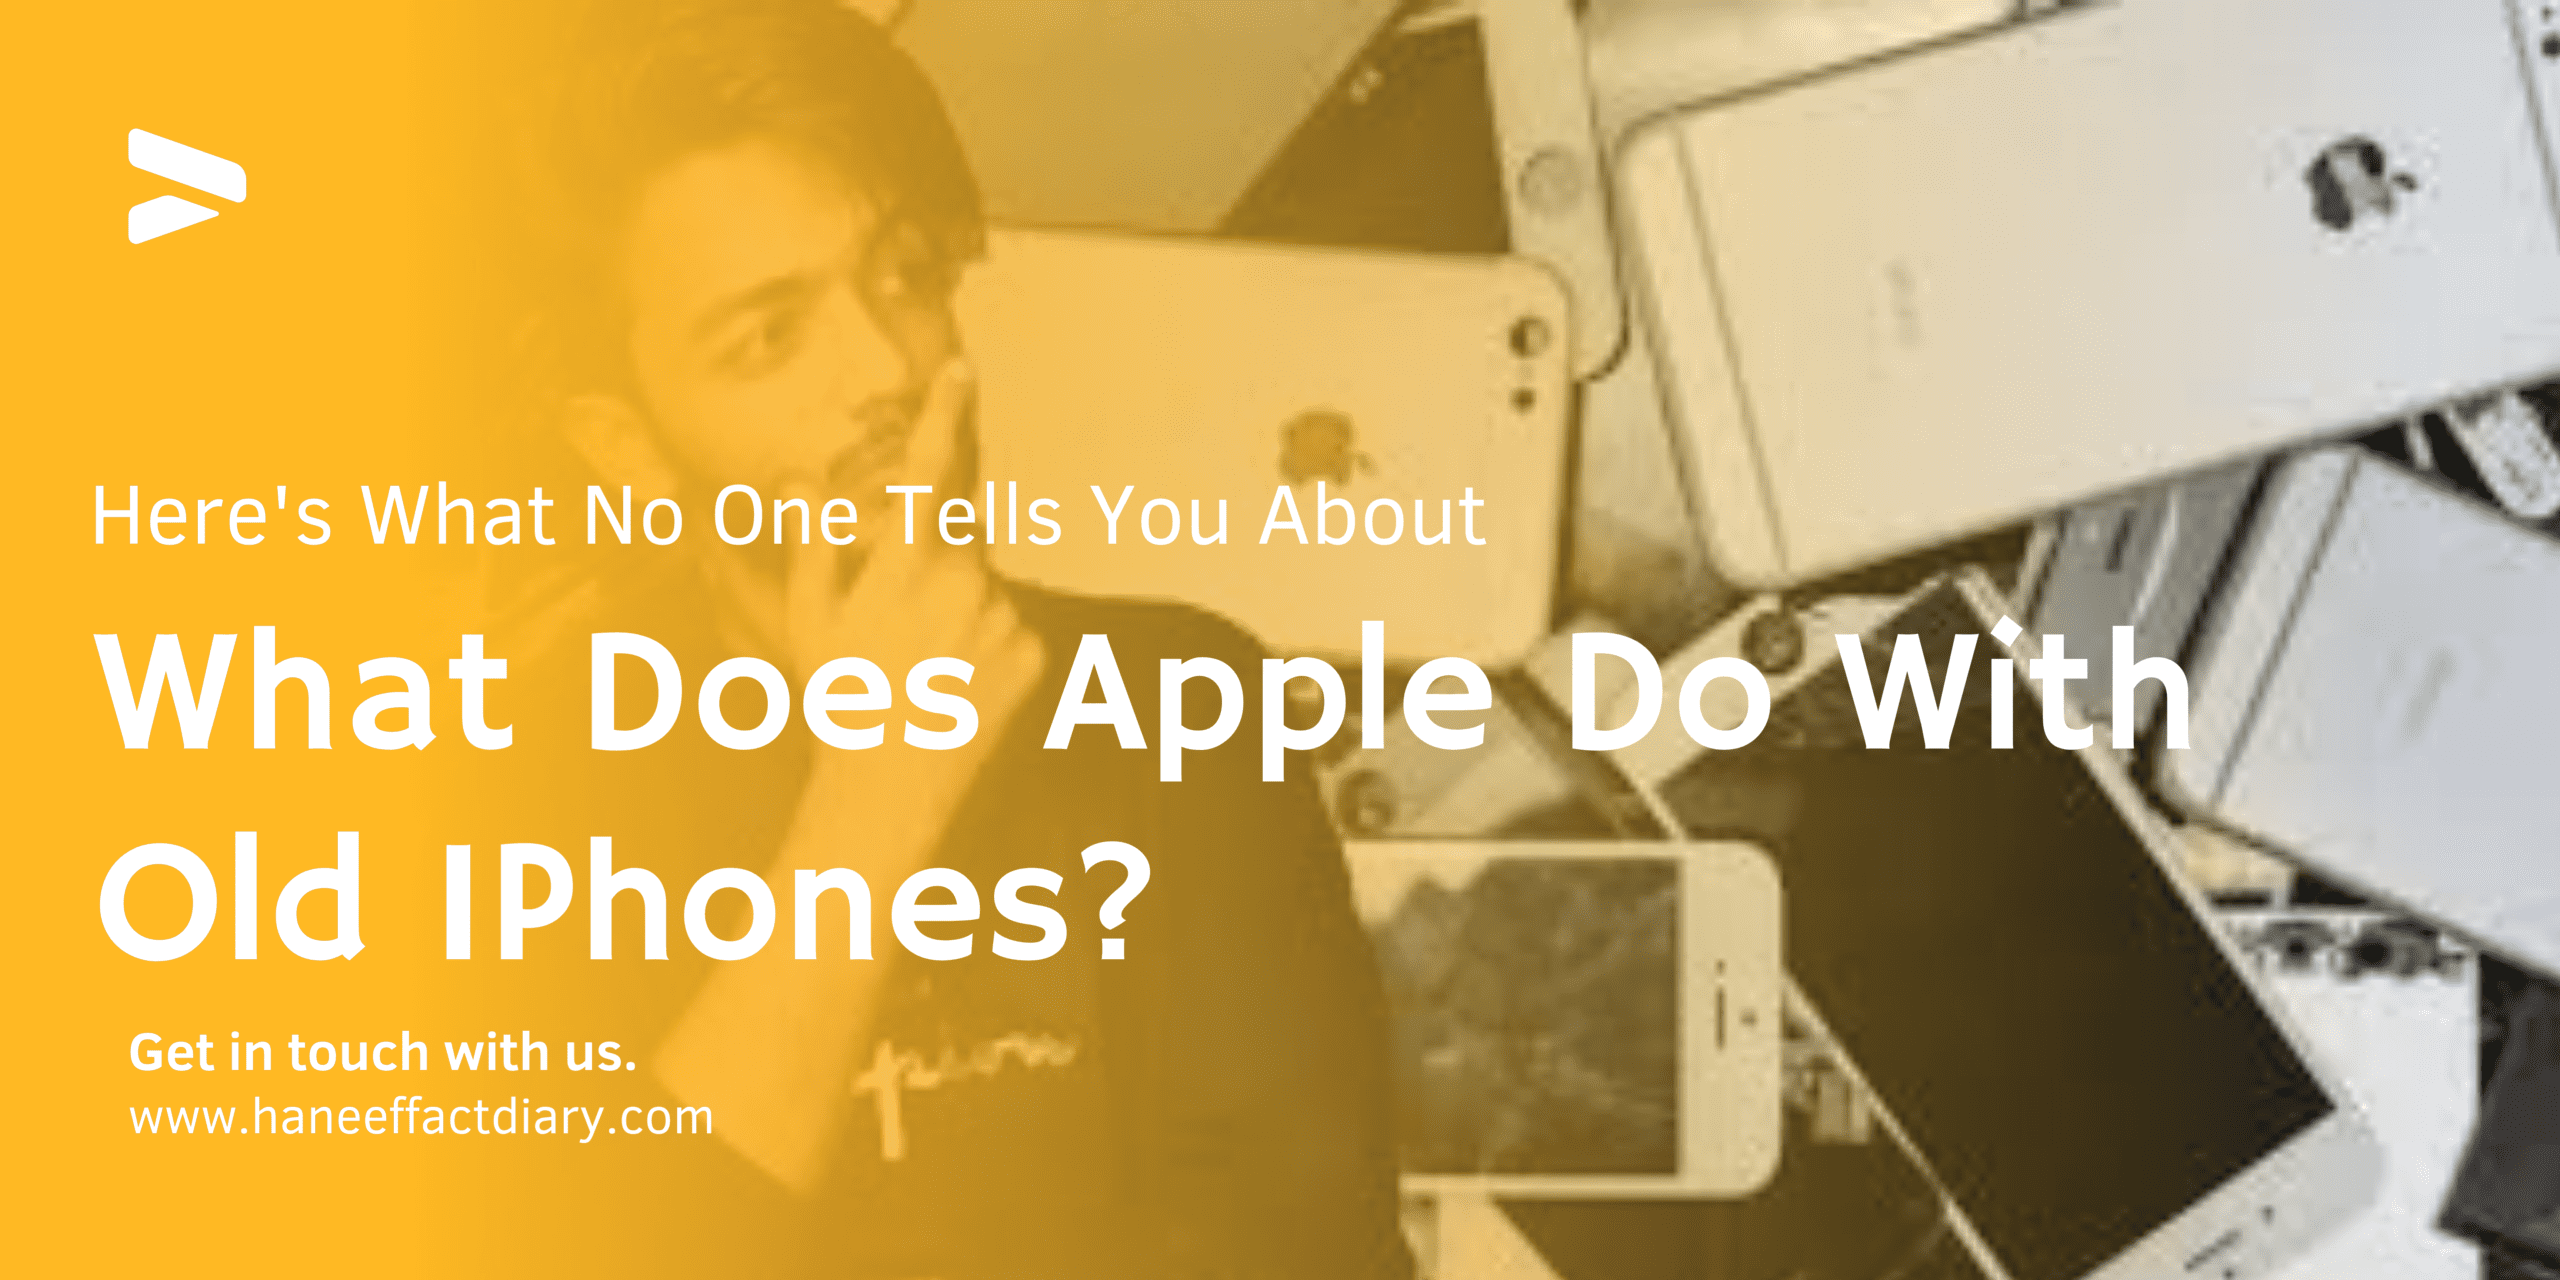 Here's What No One Tells You About What Does Apple Do With Old IPhones